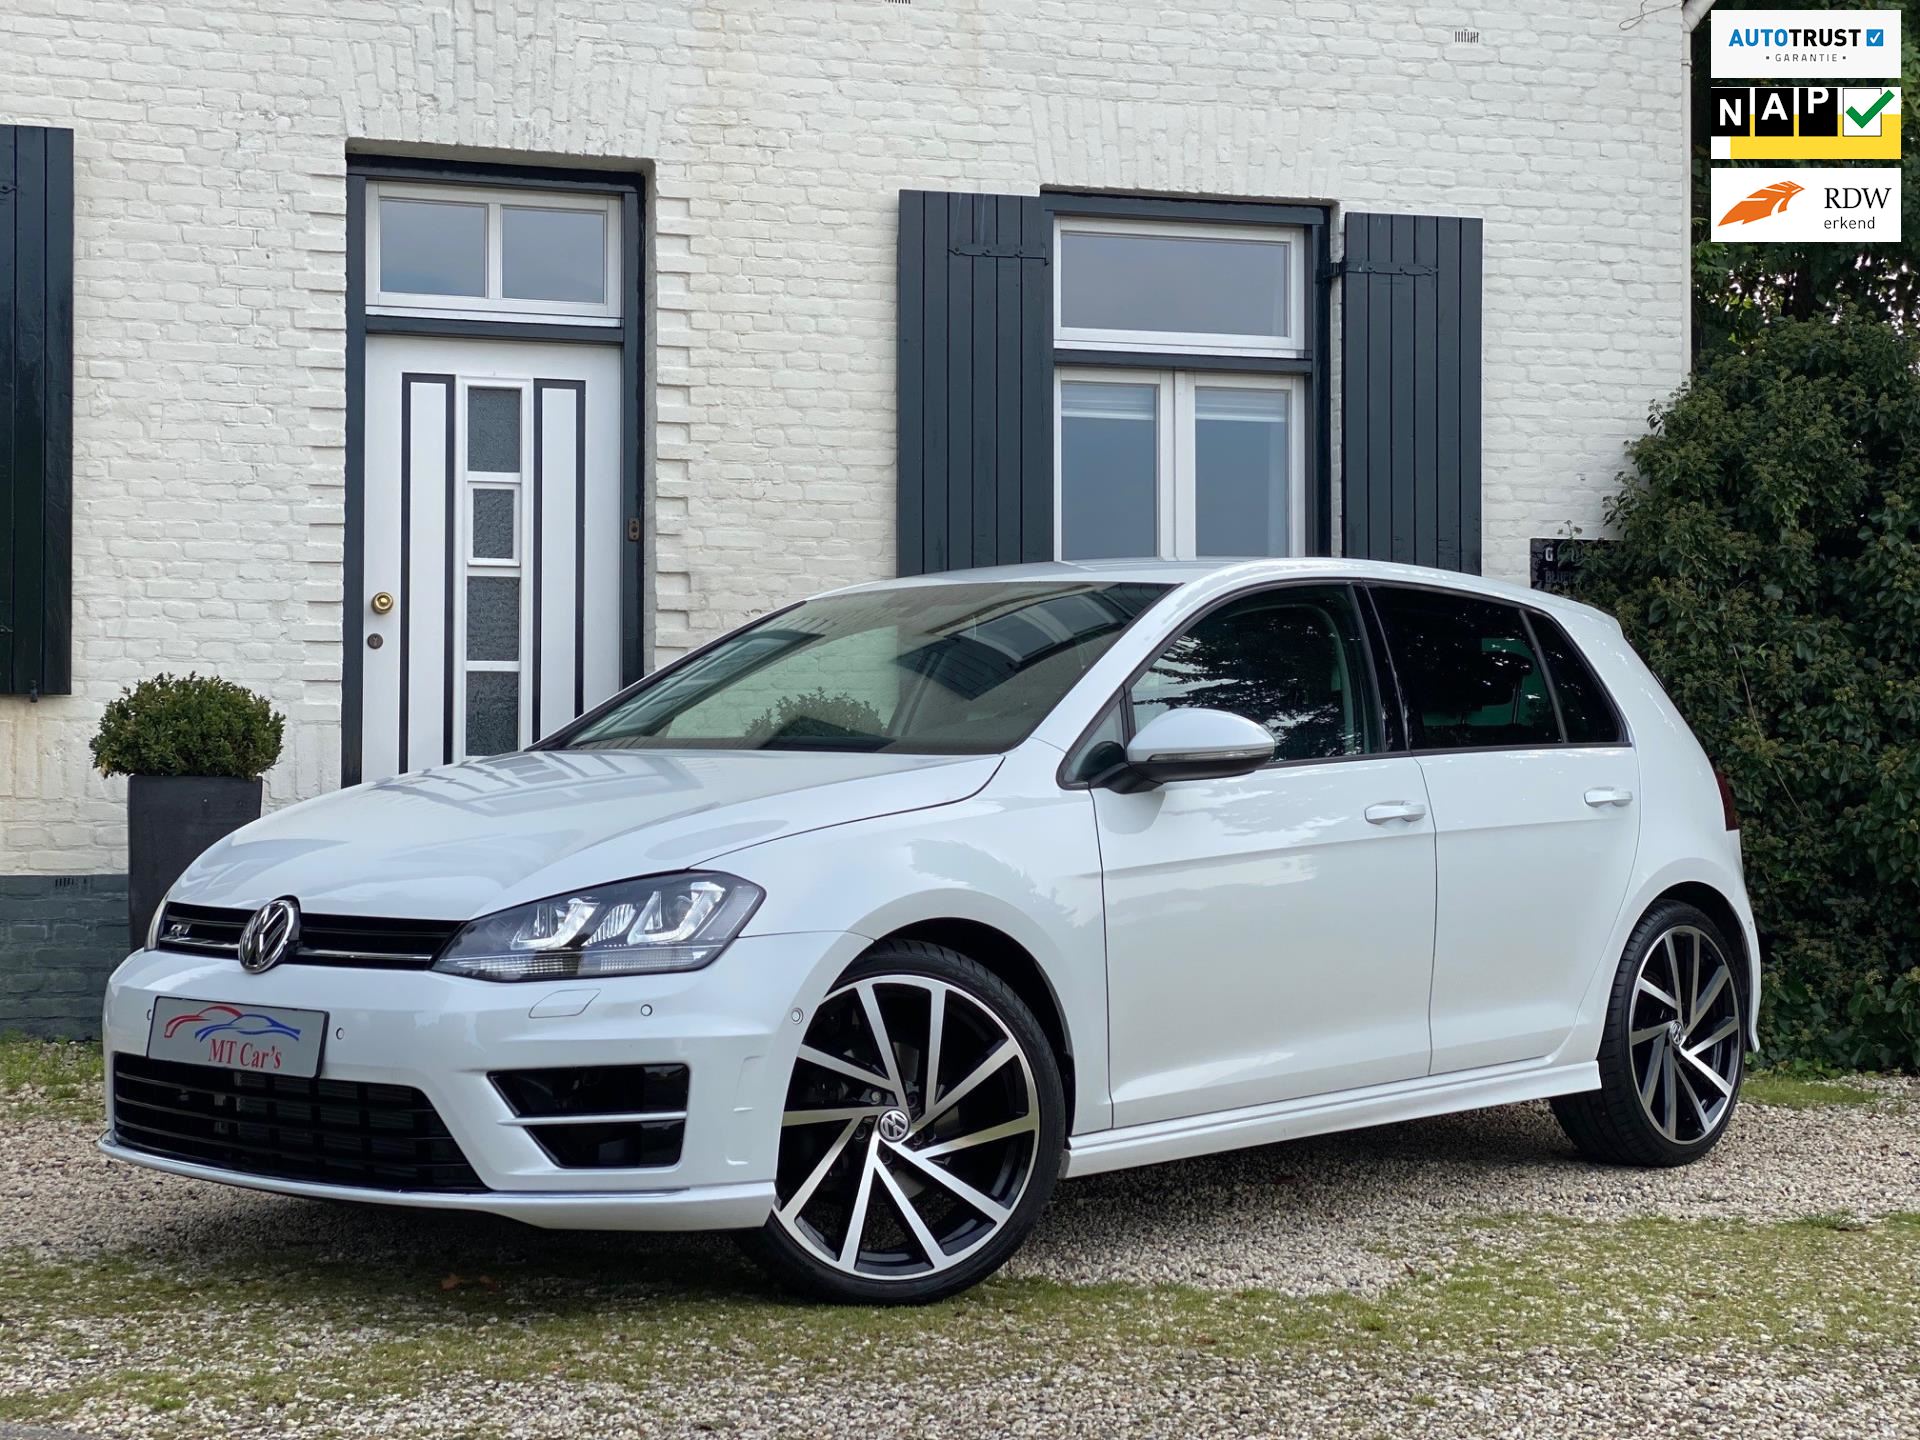 Volkswagen Golf occasion - M.T.  Cars & Carcleaningcenter